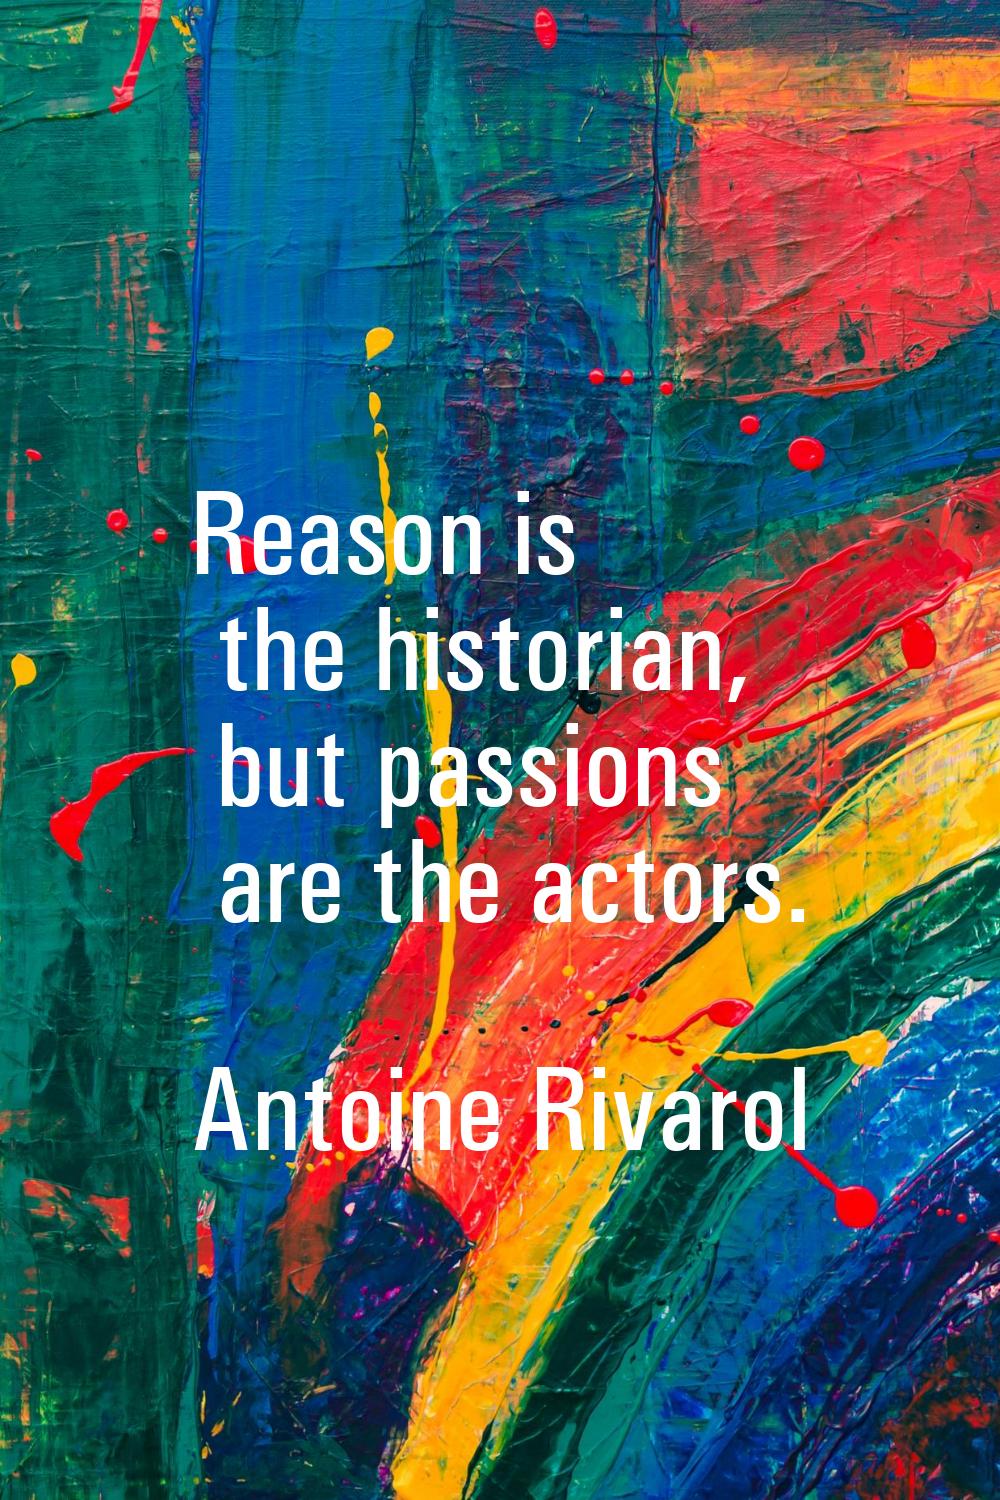 Reason is the historian, but passions are the actors.